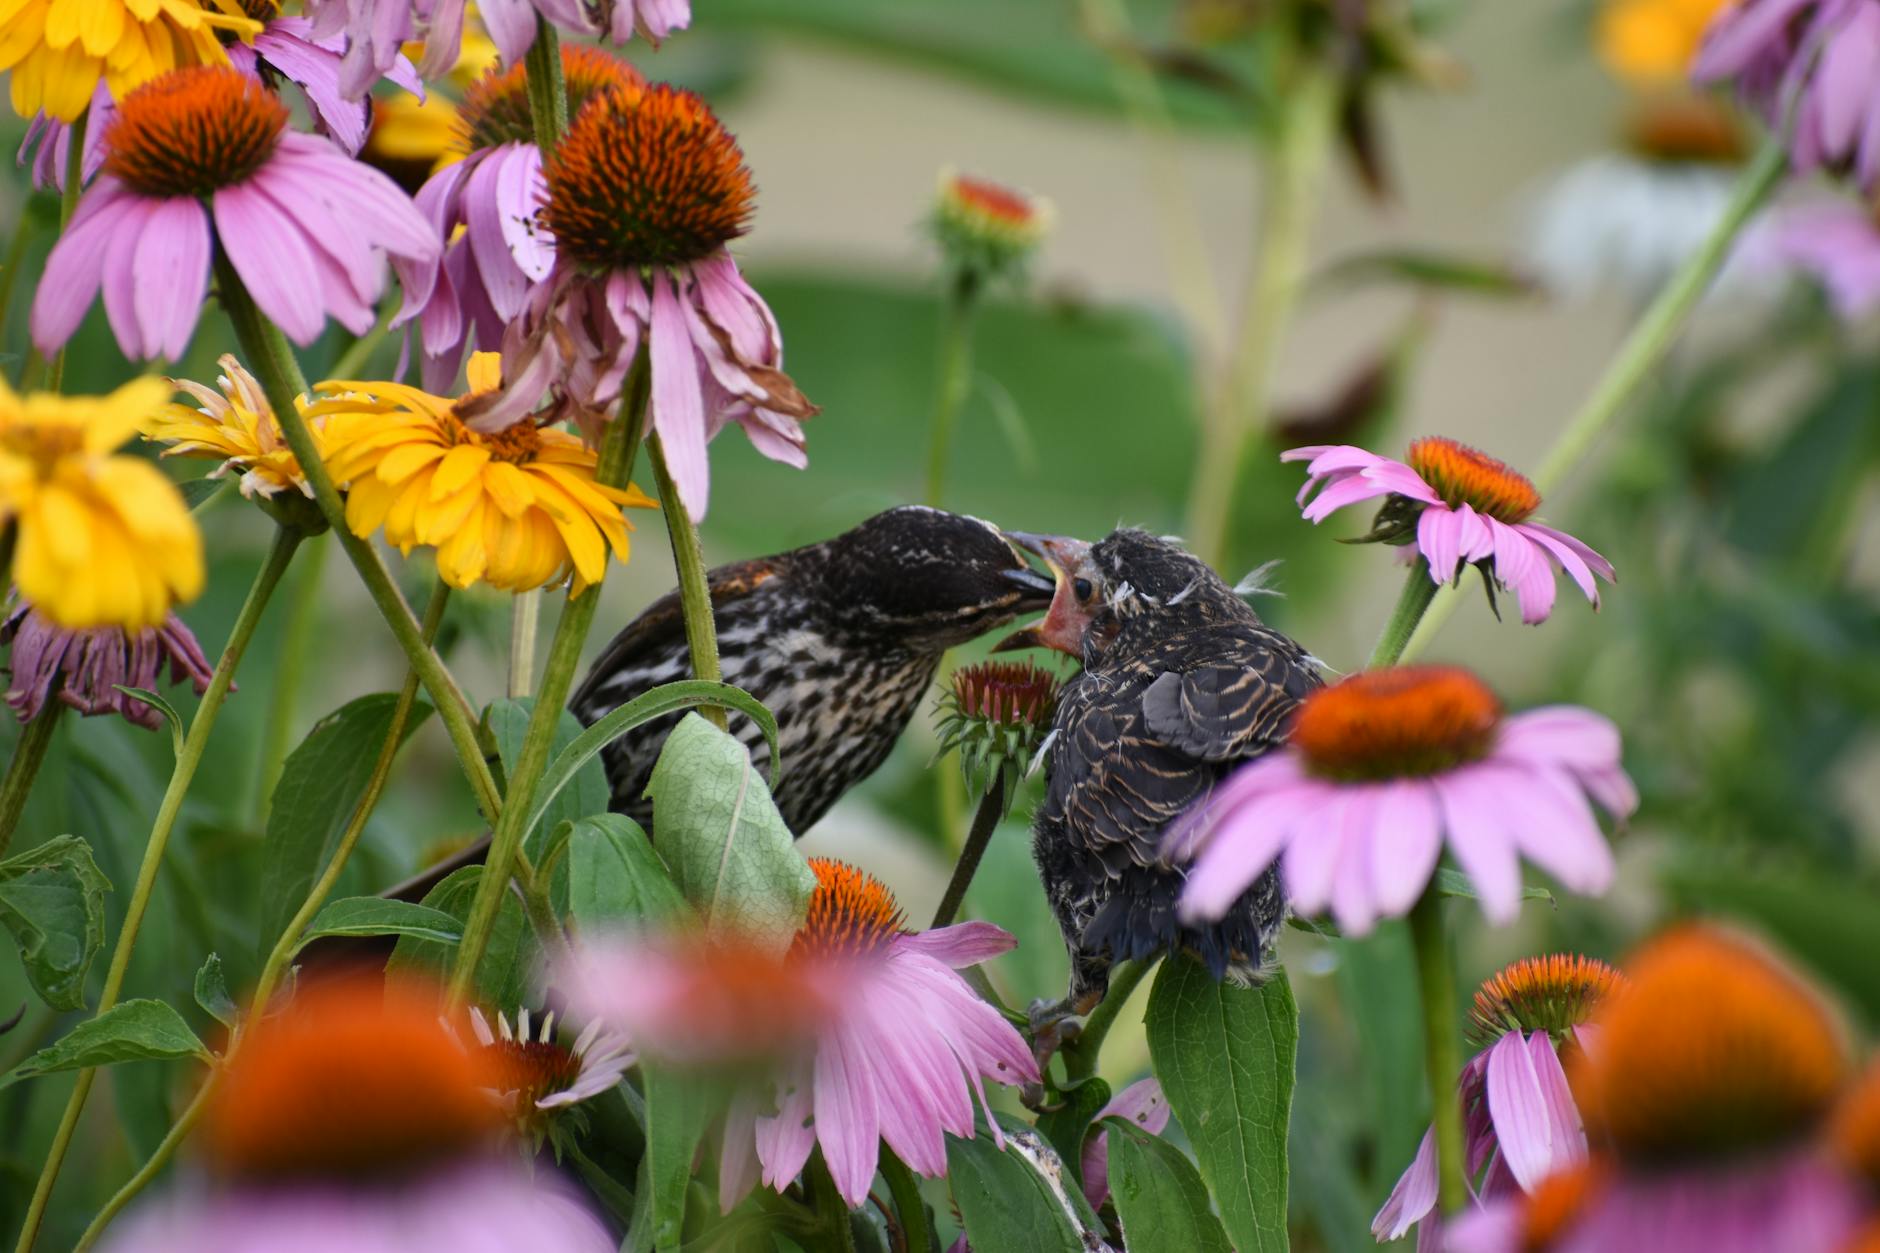 close up photo of birds on flowers